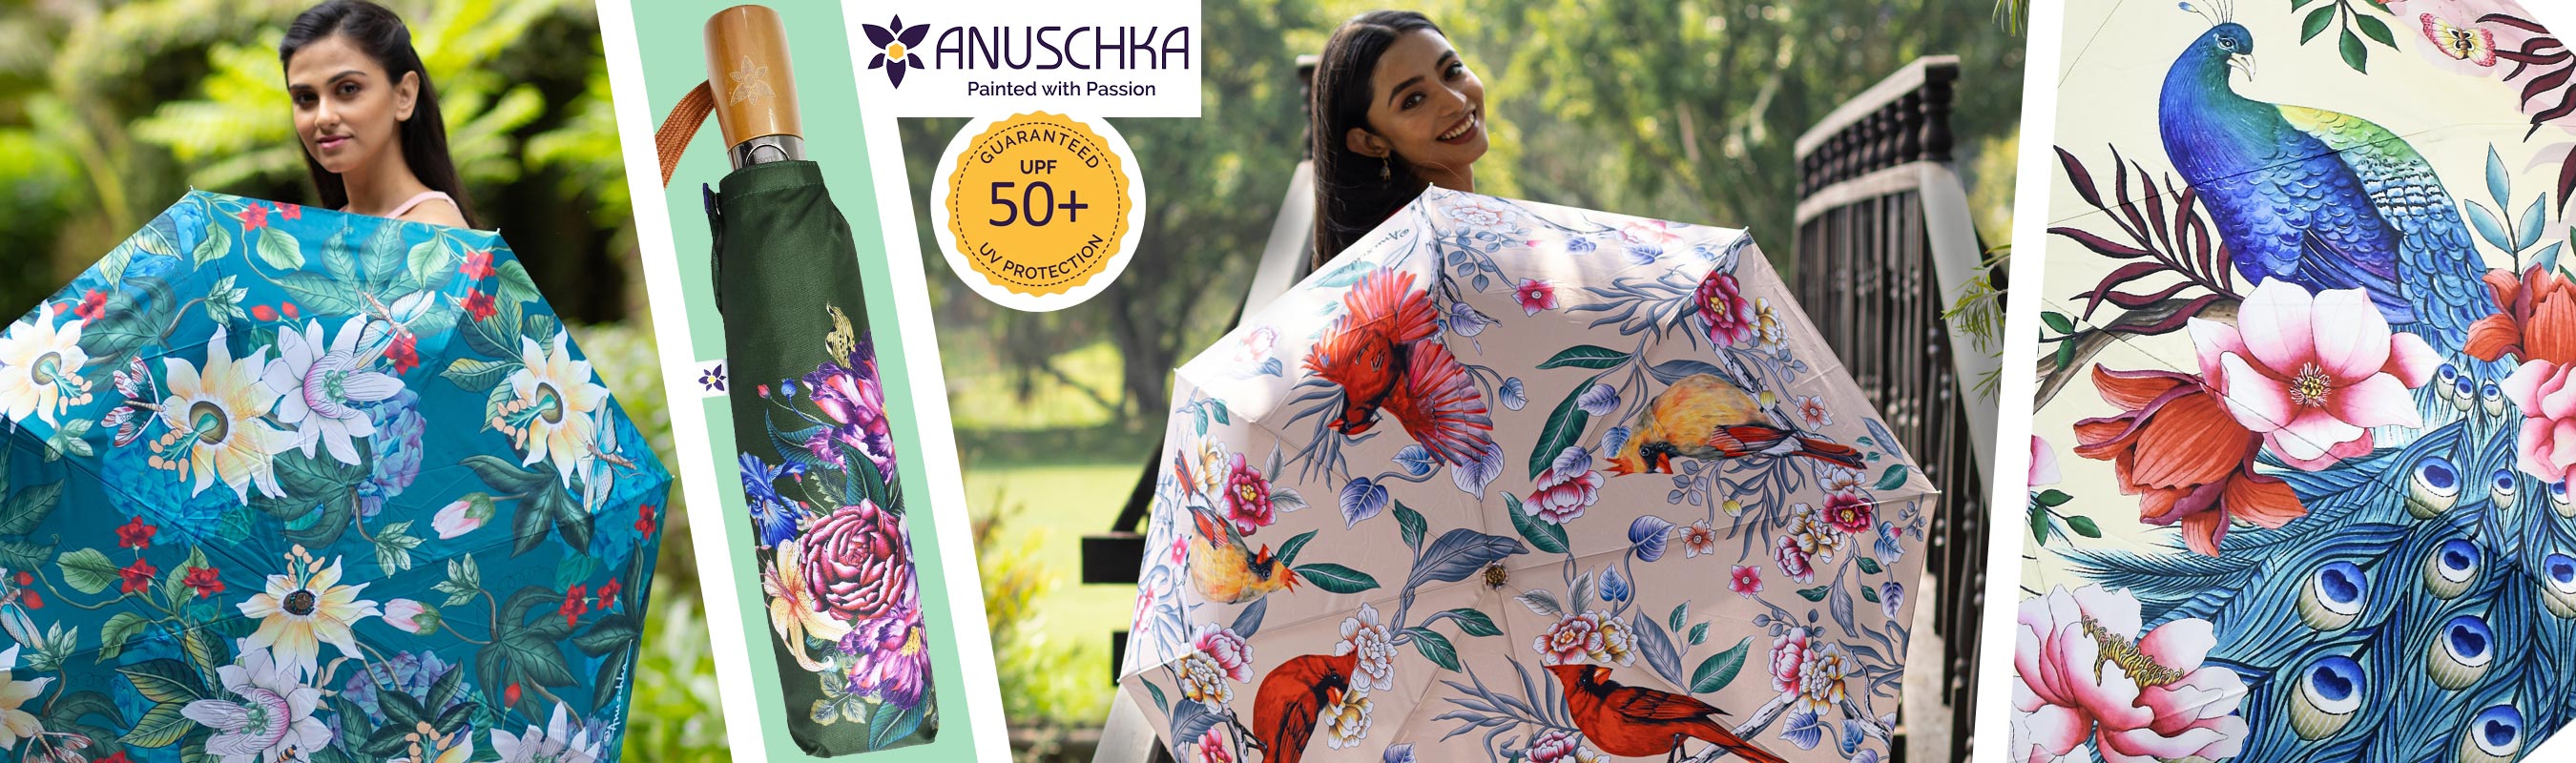 We have you covered come rain or shine with our Anuschka Auto Open & Close Folding Umbrellas now available at Brolliesgalore!